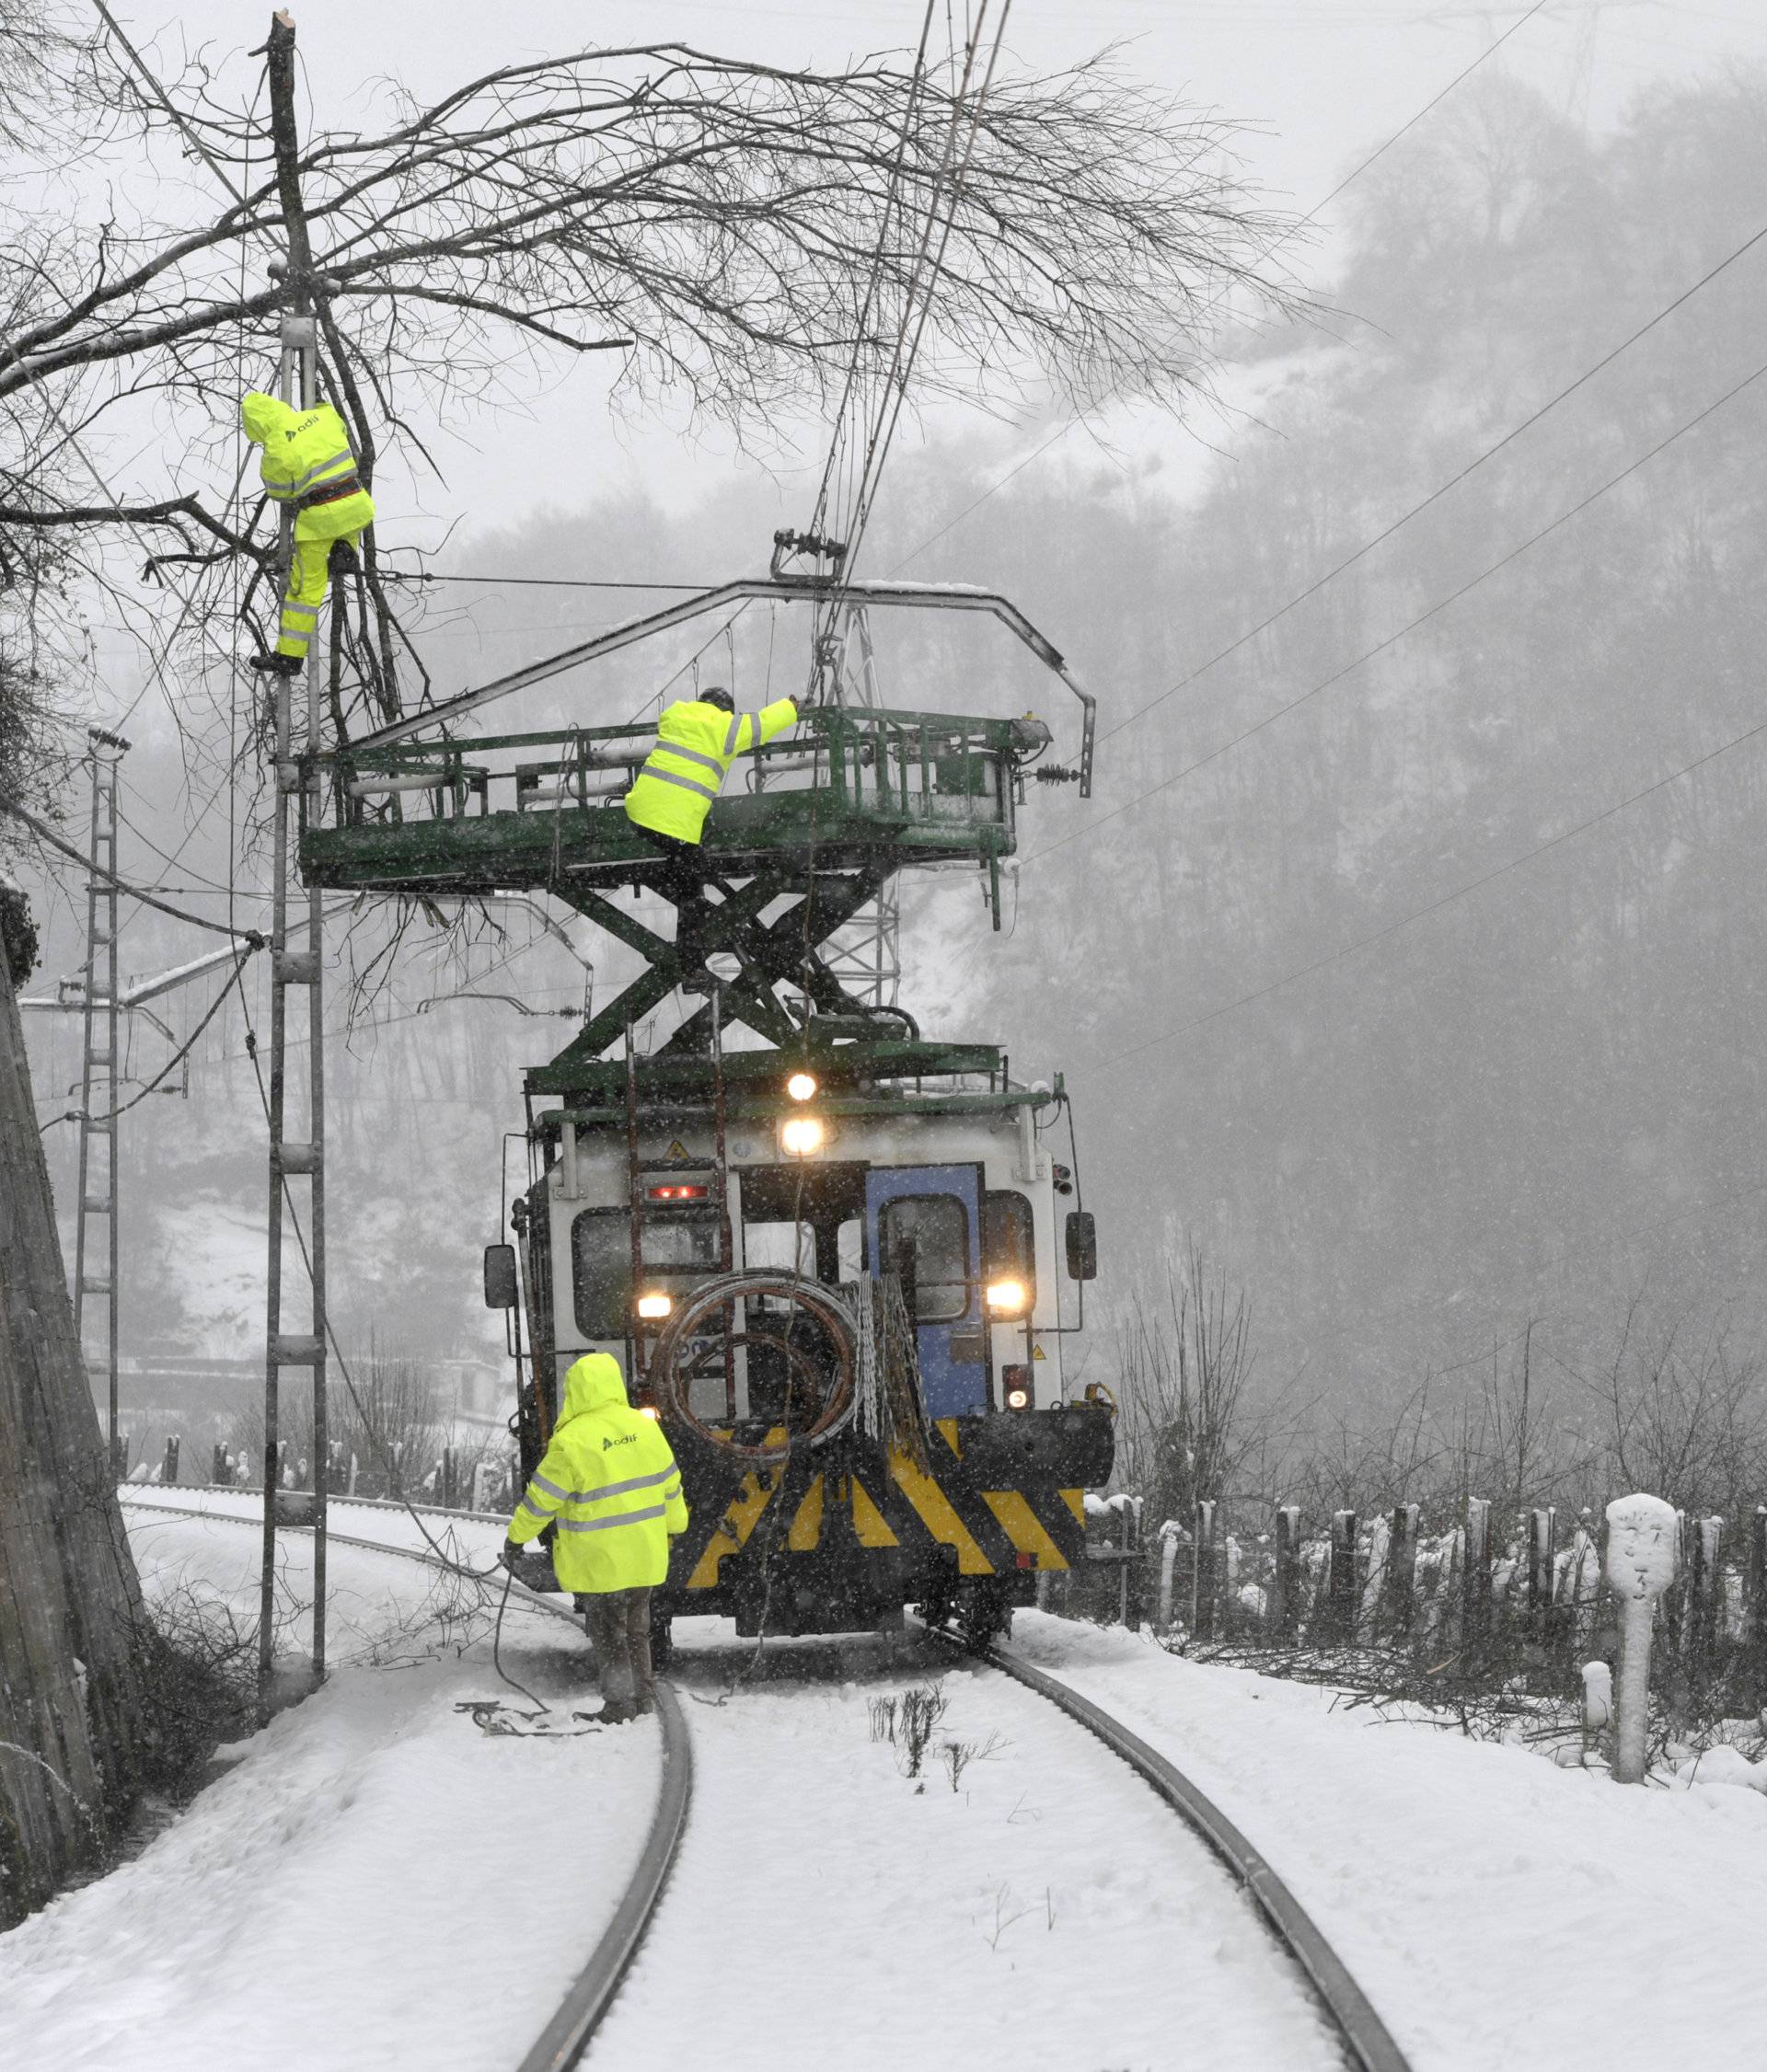 Workers of the railway company ADIF try to clear the railway between Asturias and Leon closed for trains because of the fallen tree branches and snow near Pola de Lena